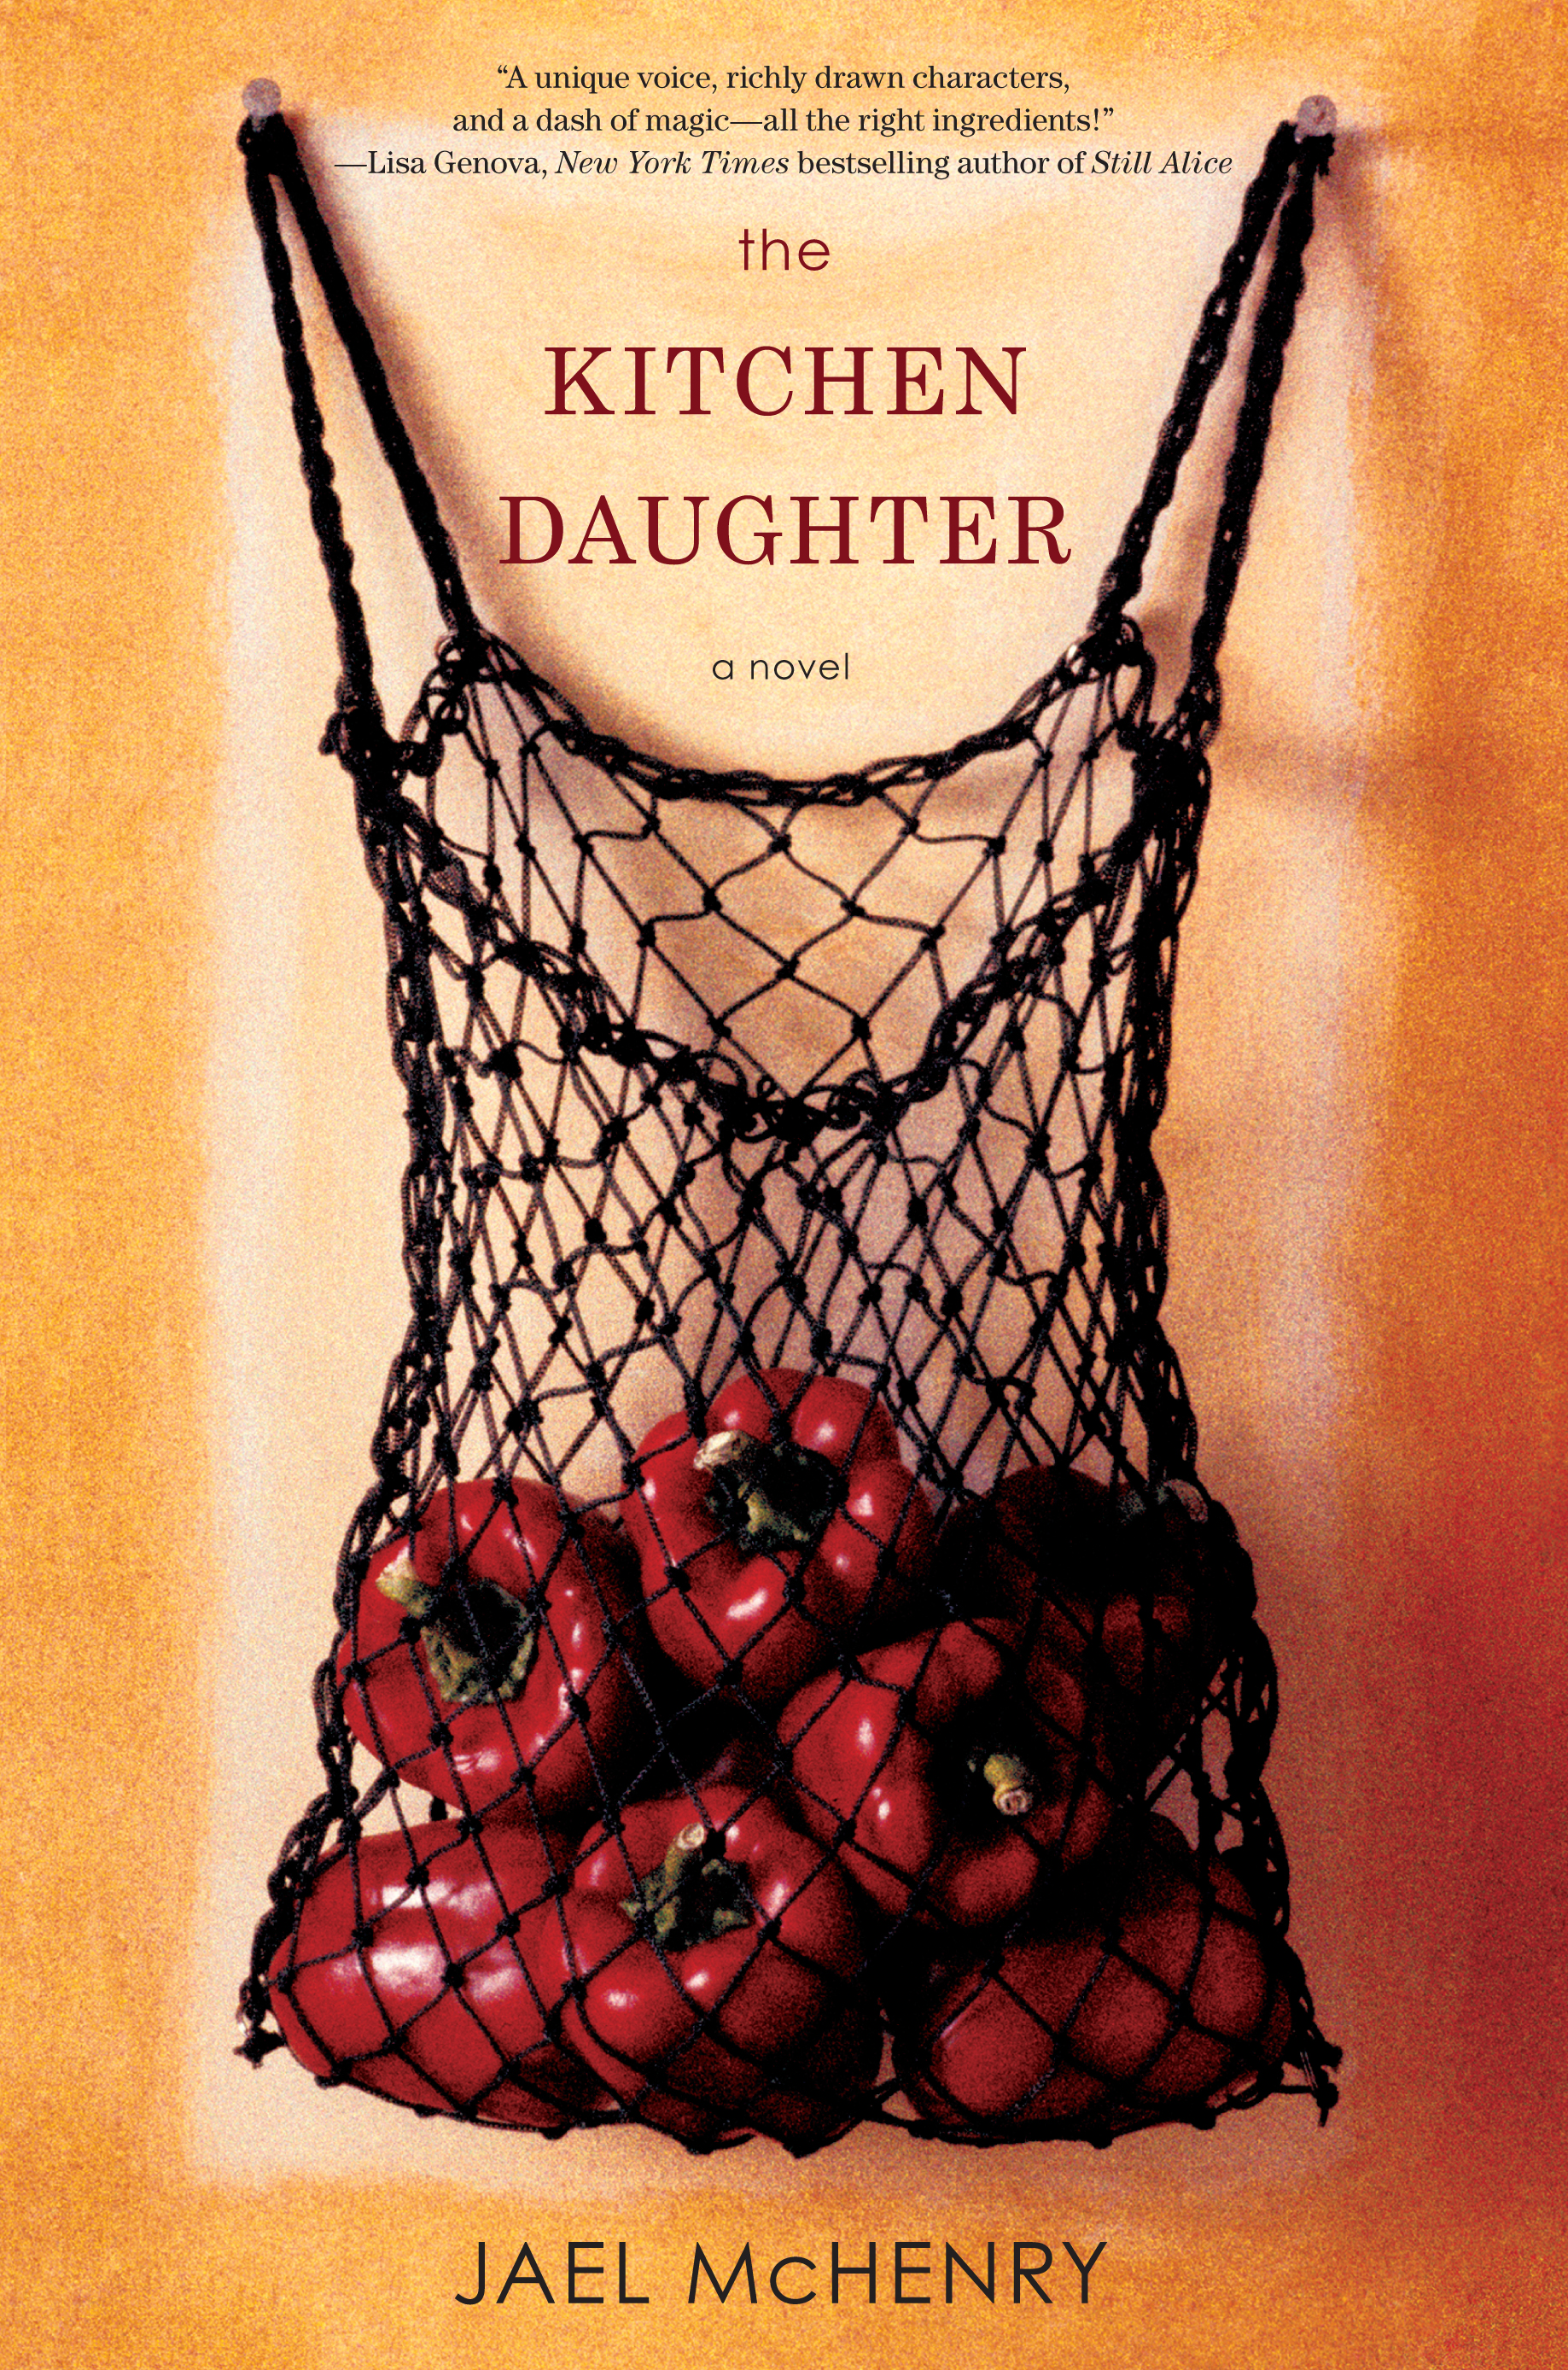 Image for "The Kitchen Daughter"